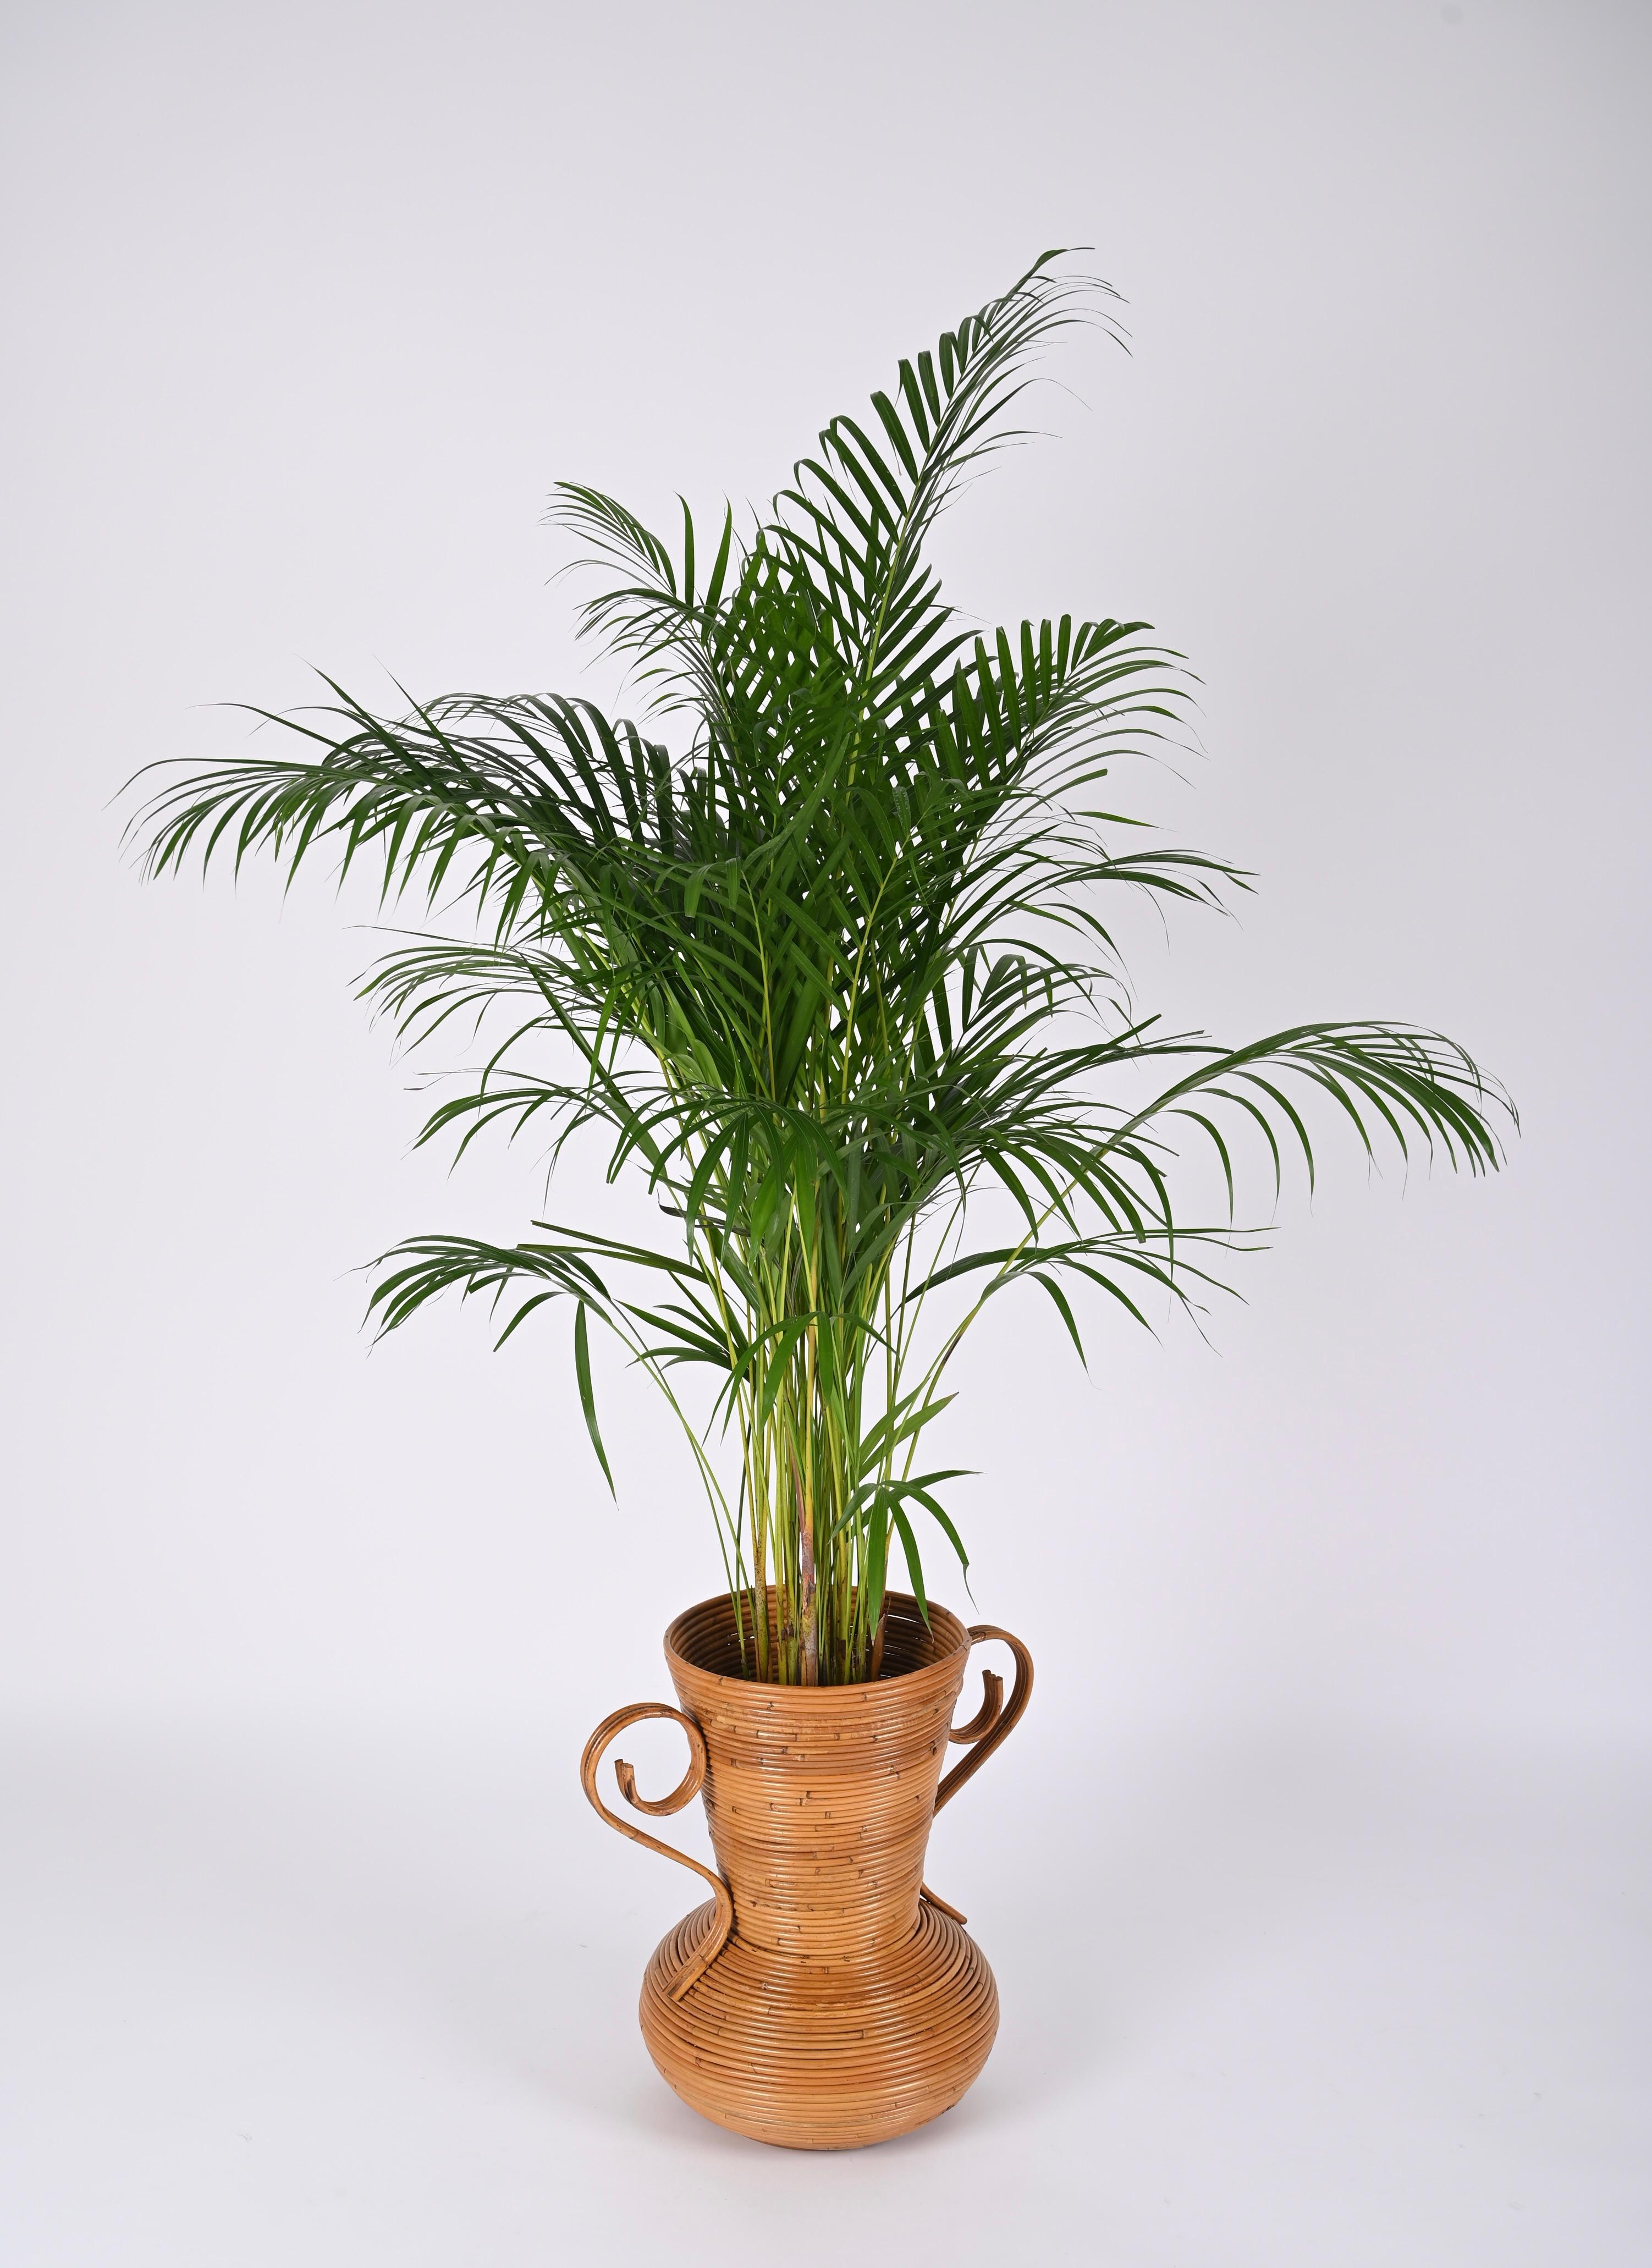 20th Century Midcentury Bamboo and Rattan Decorative Vase, by Vivai del Sud, Italy, 1970s For Sale